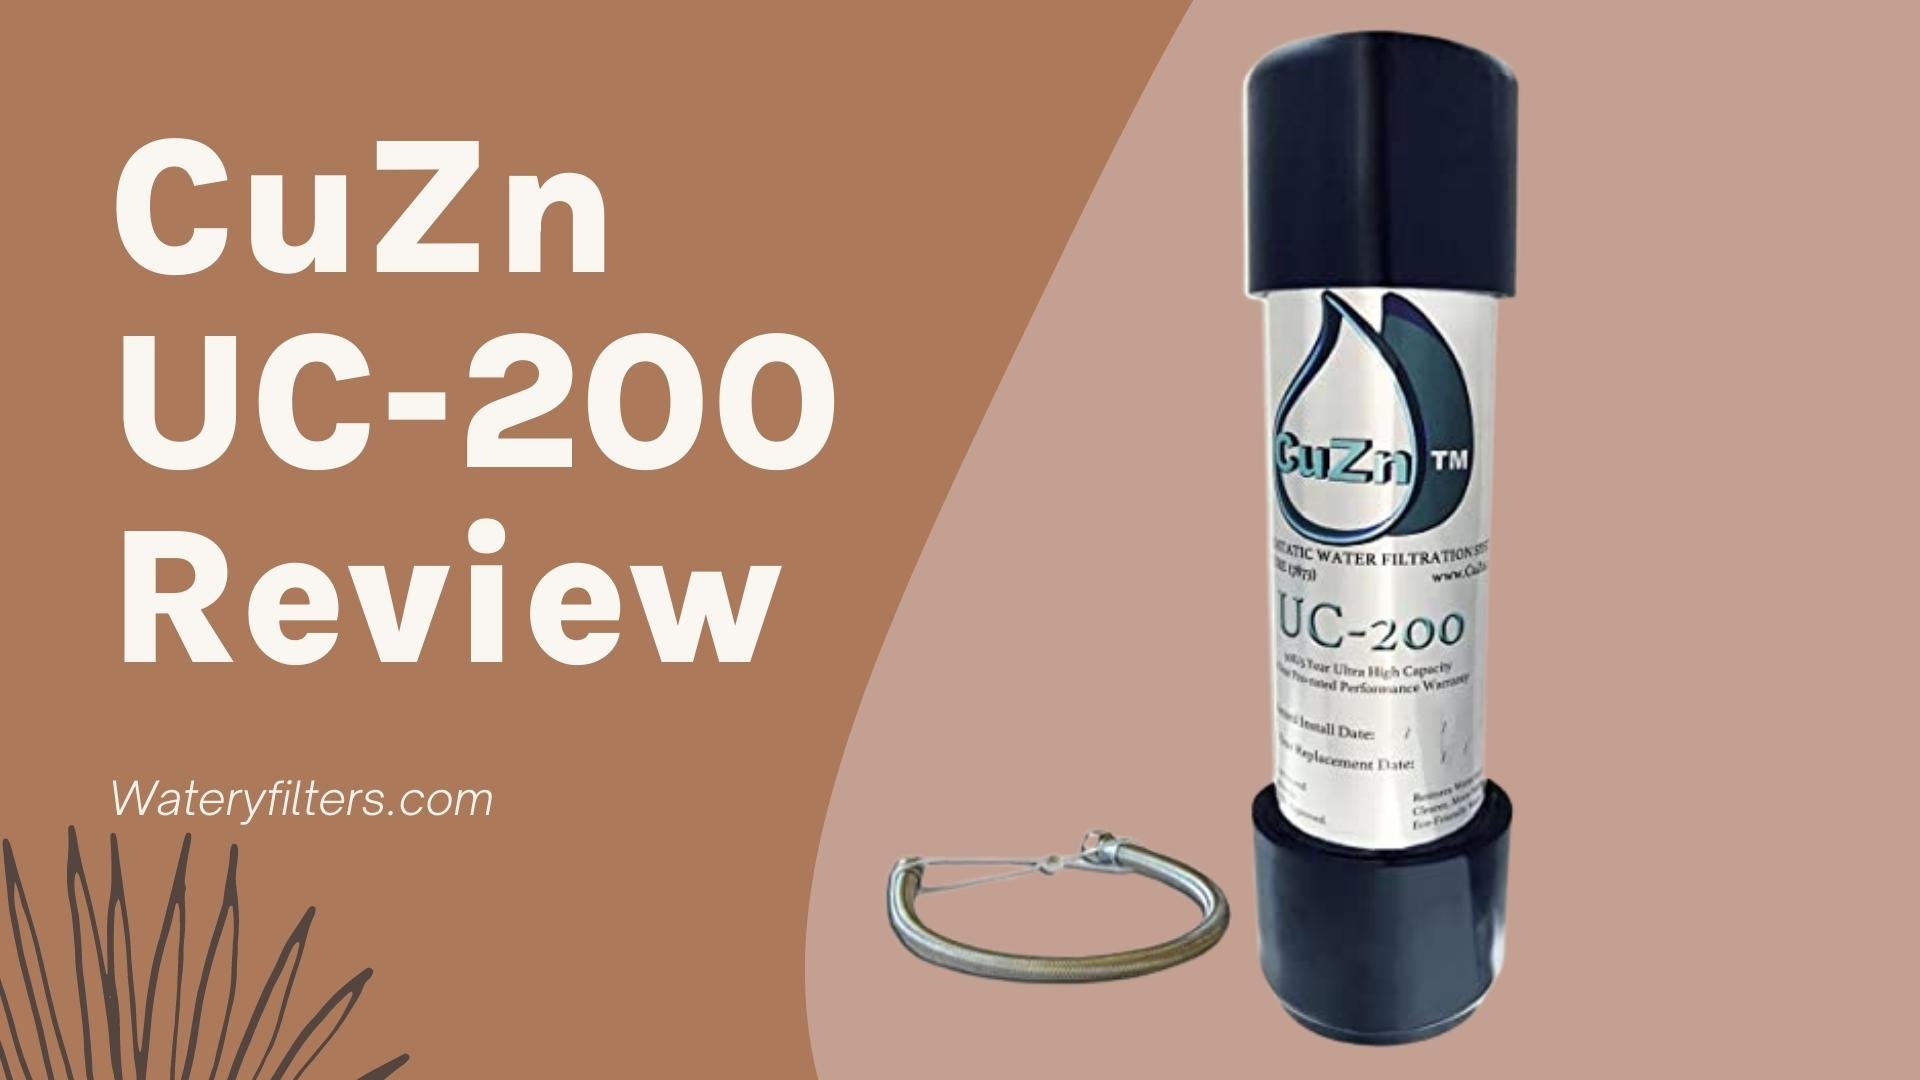 CuZn UC-200 Review